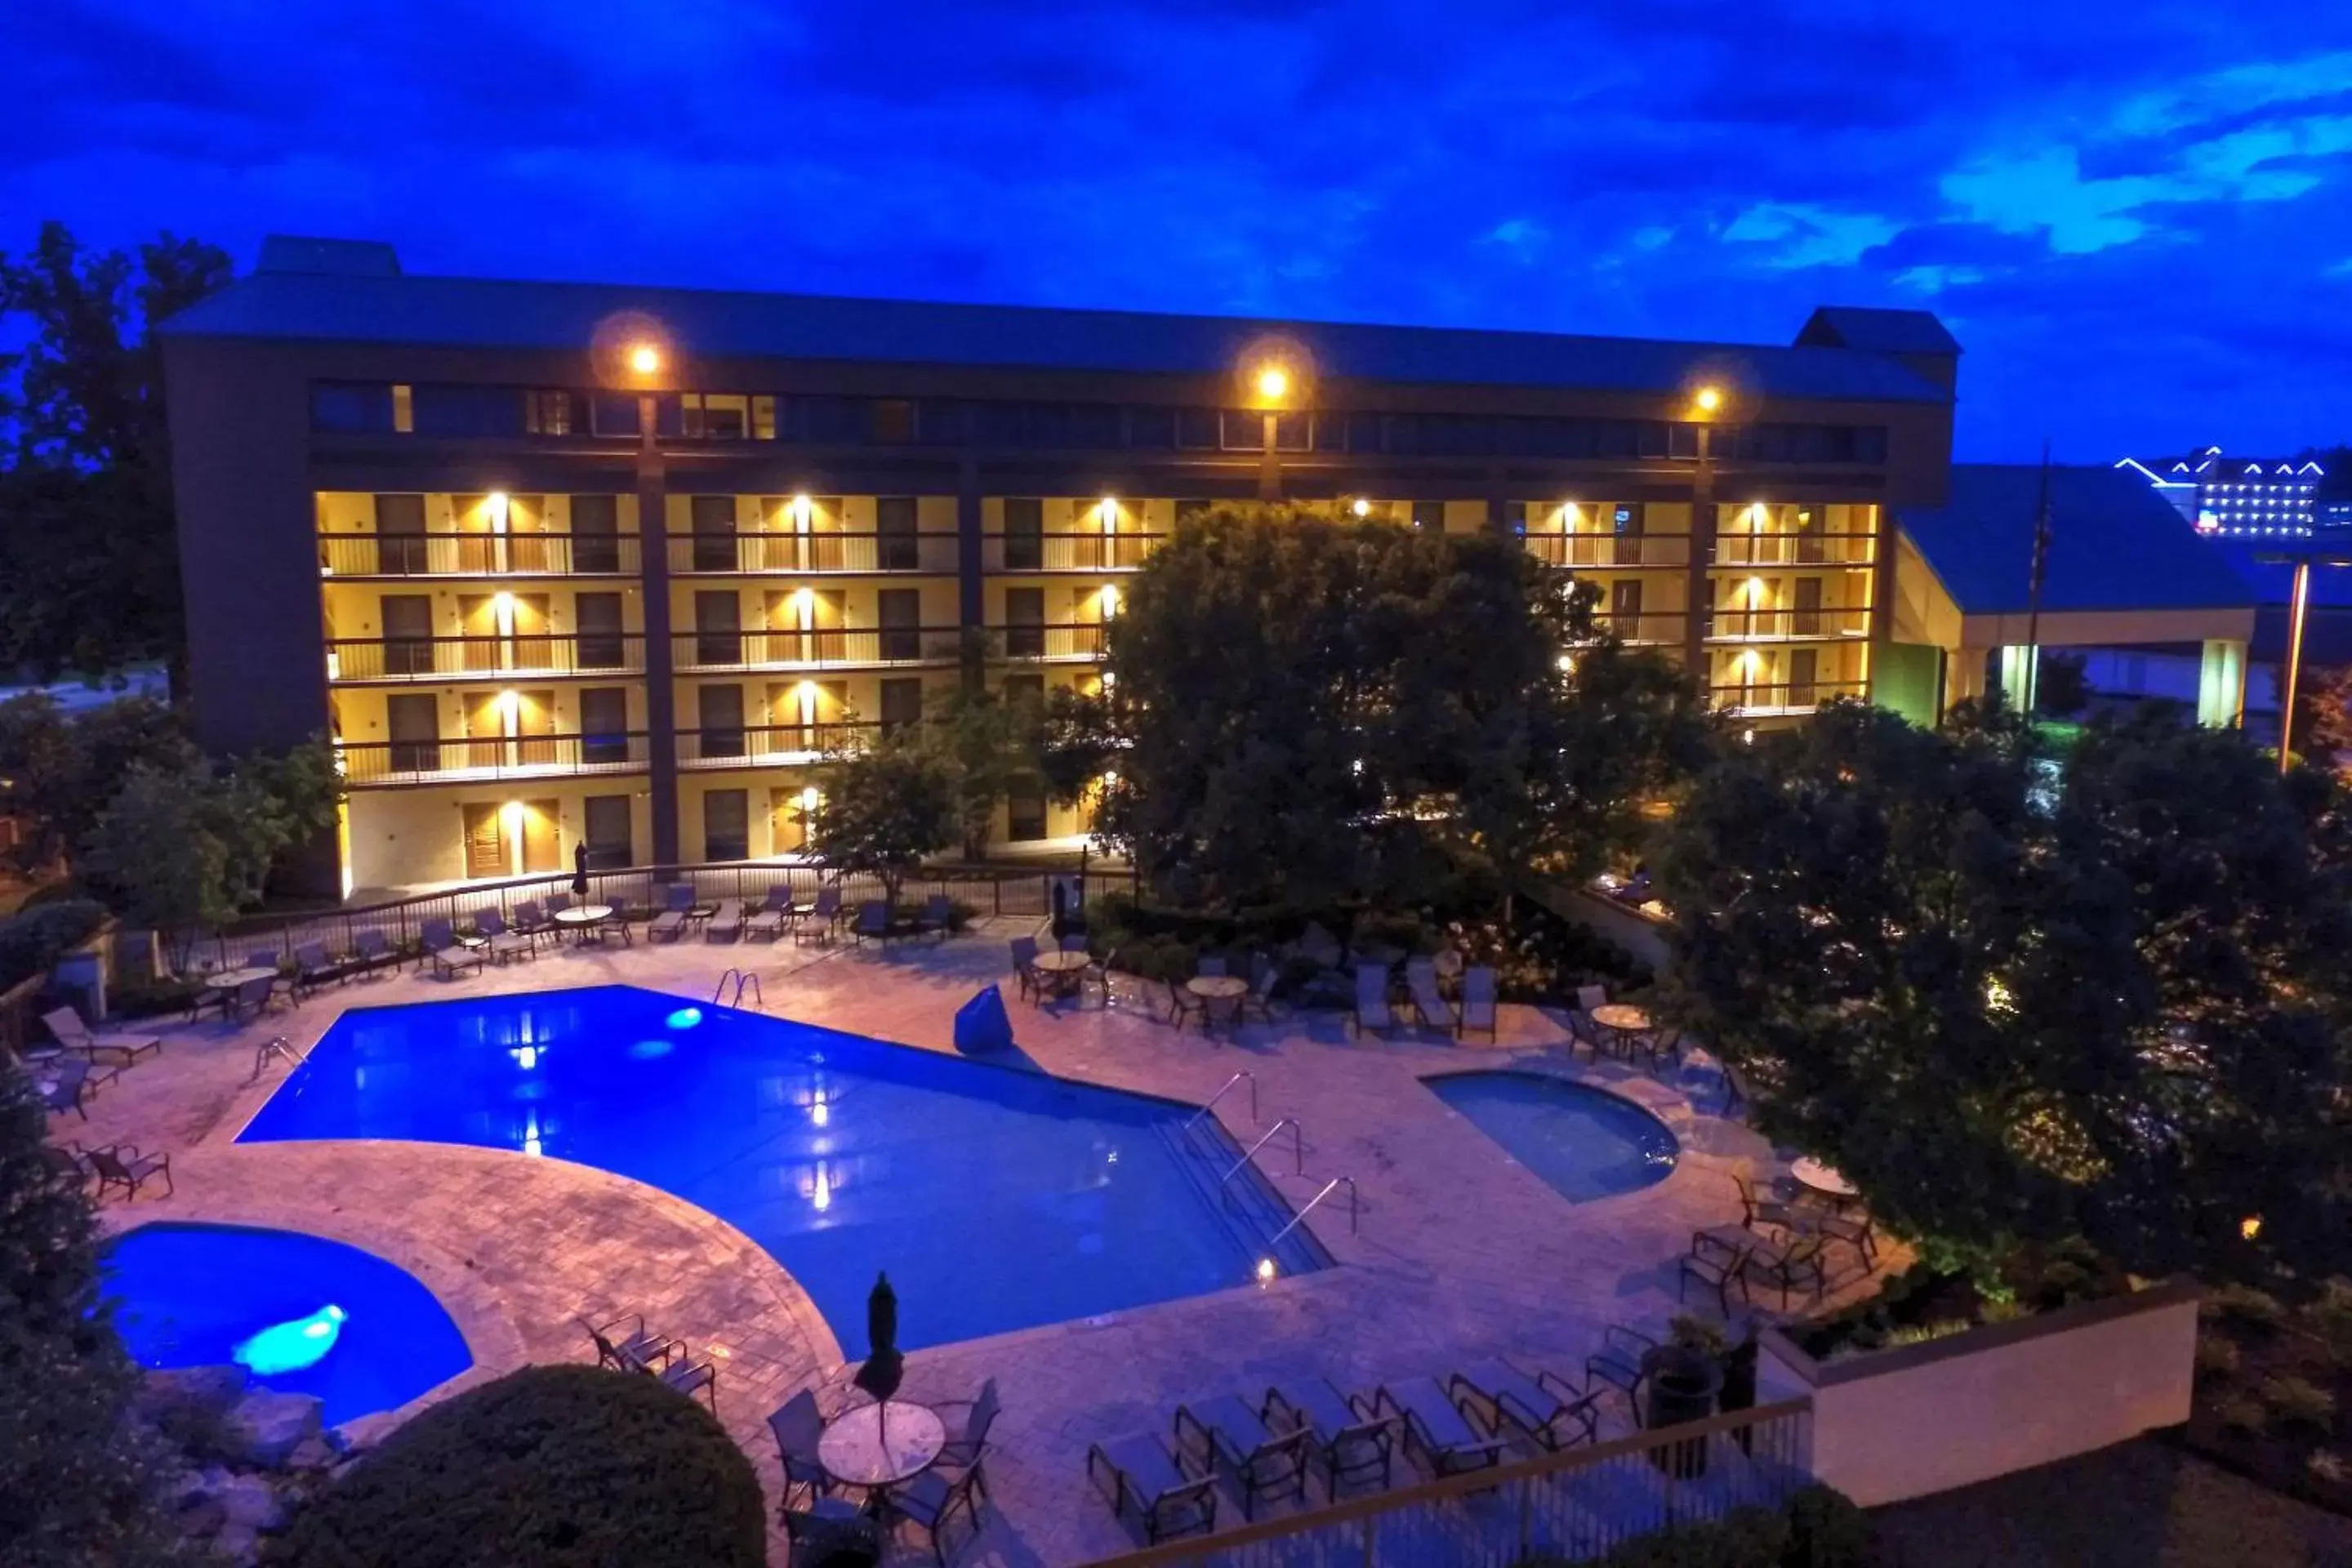 Property building, Pool View in Quality Inn Near the Island Pigeon Forge